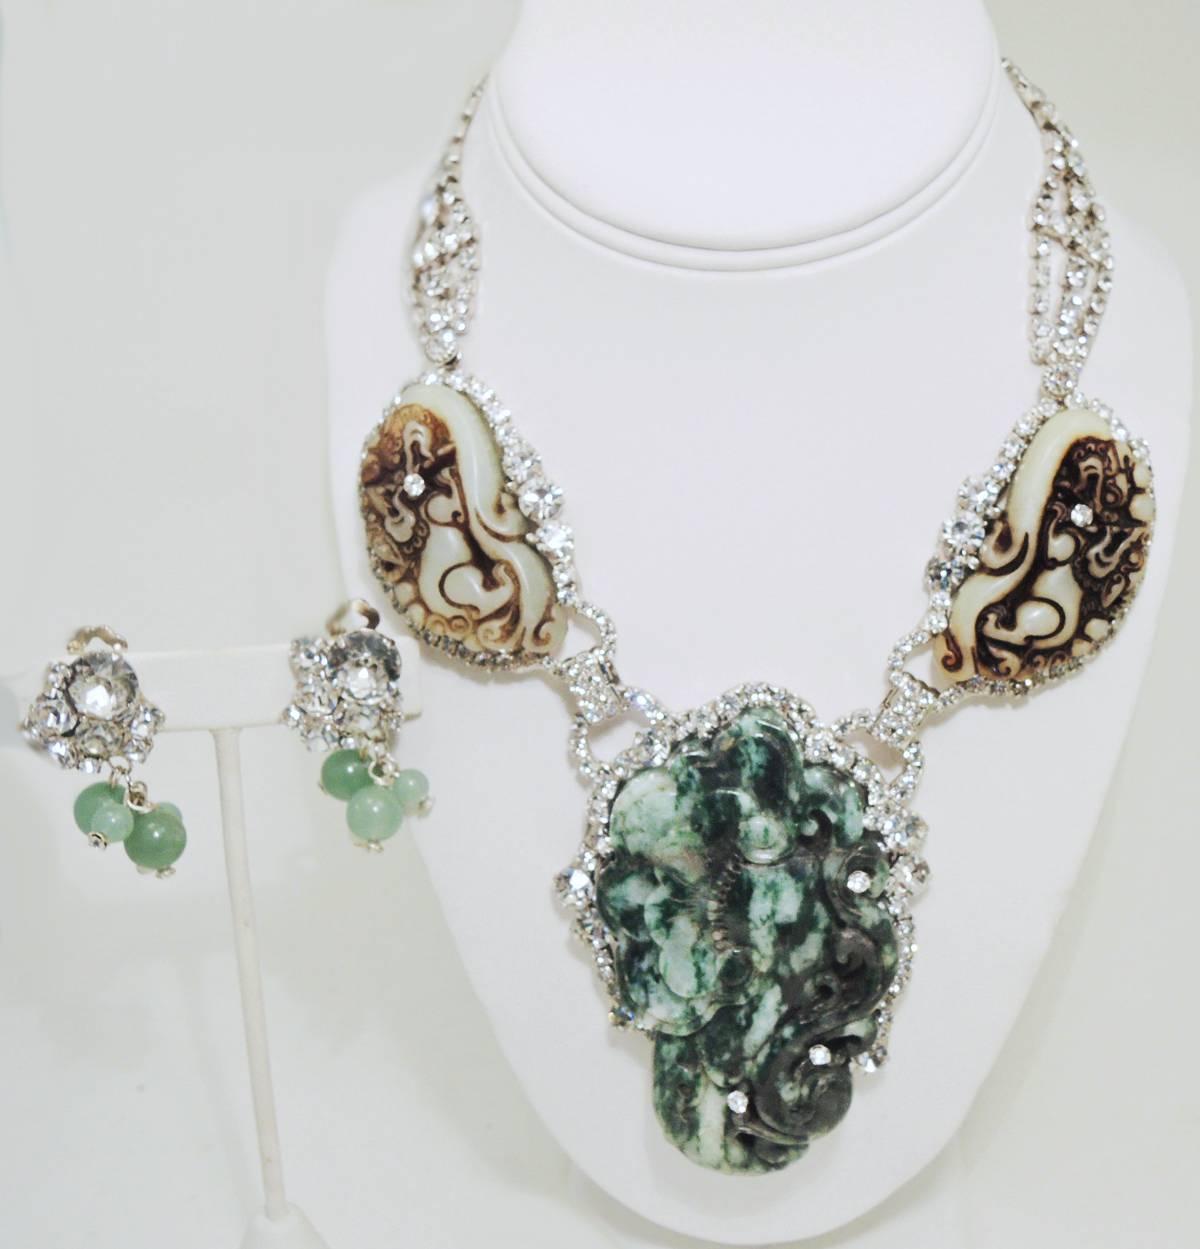 Robert Sorrell “One Of A Kind” Carved Faux Jade & Crystals Necklace & Earrings In Excellent Condition For Sale In New York, NY